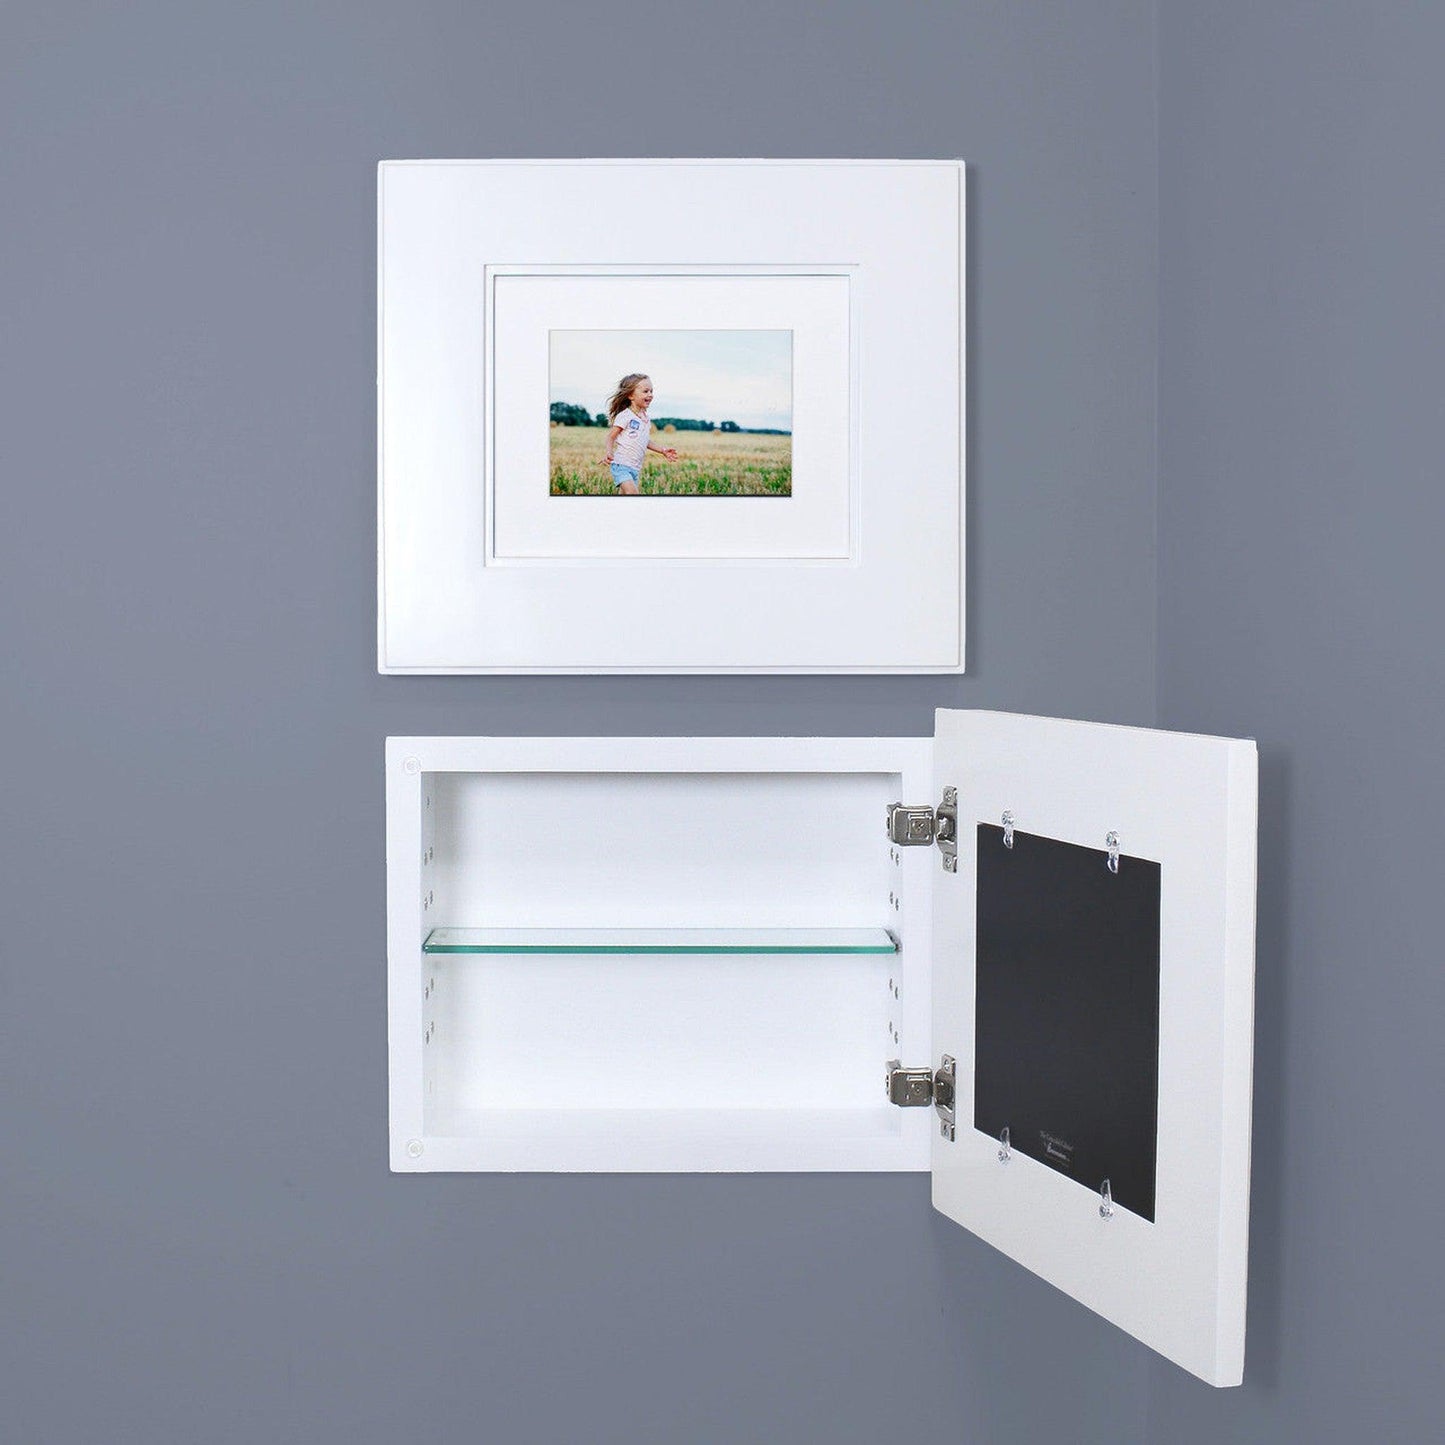 Fox Hollow Furnishings 14" x 11" White Compact Landscape Shaker Special 6" Depth Recessed Picture Frame Medicine Cabinet